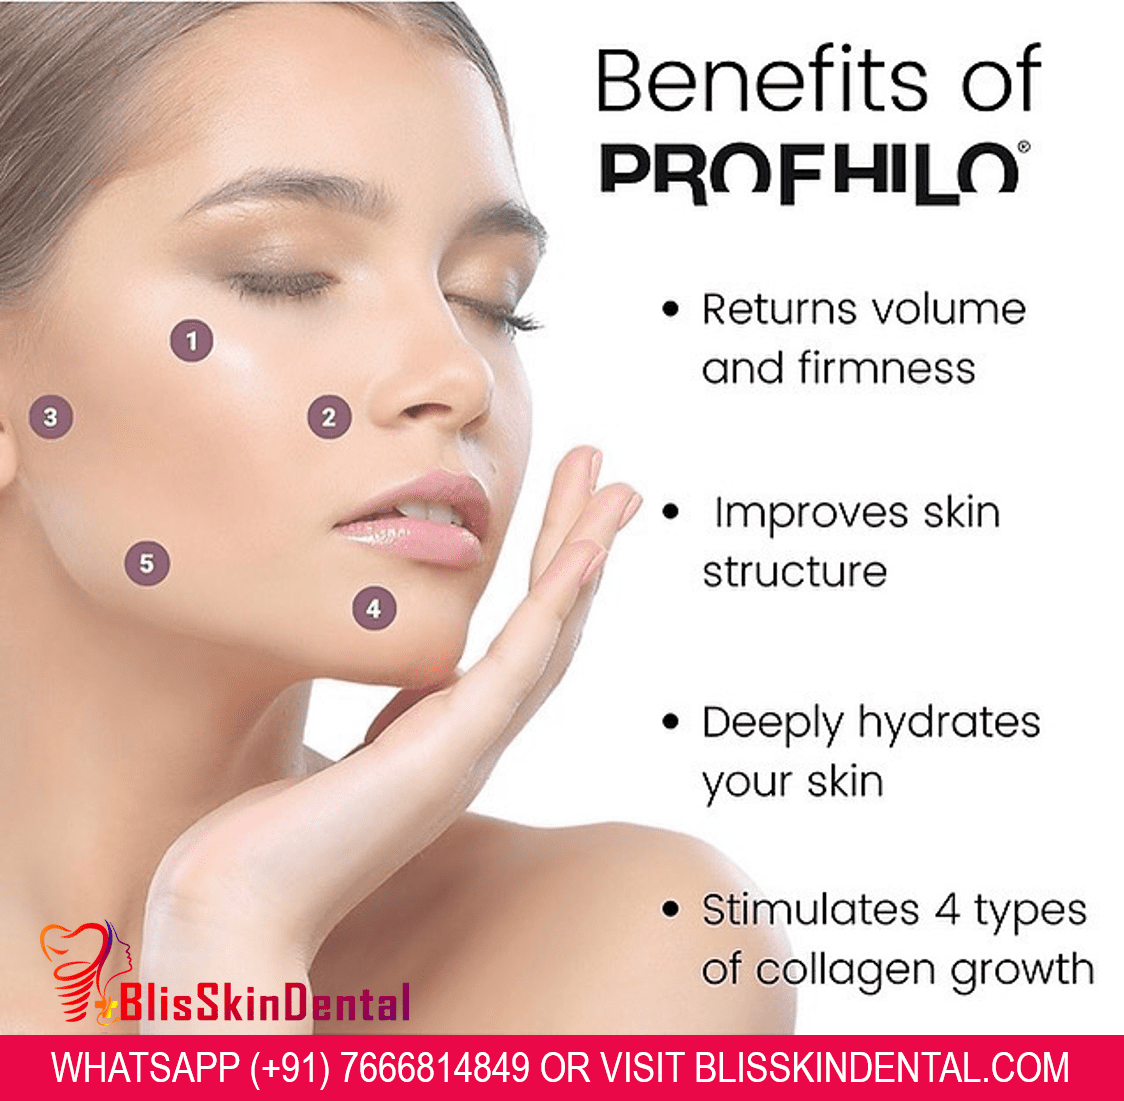 You are currently viewing Benefits of Profhilo Treatments in Bandra,Mumbai